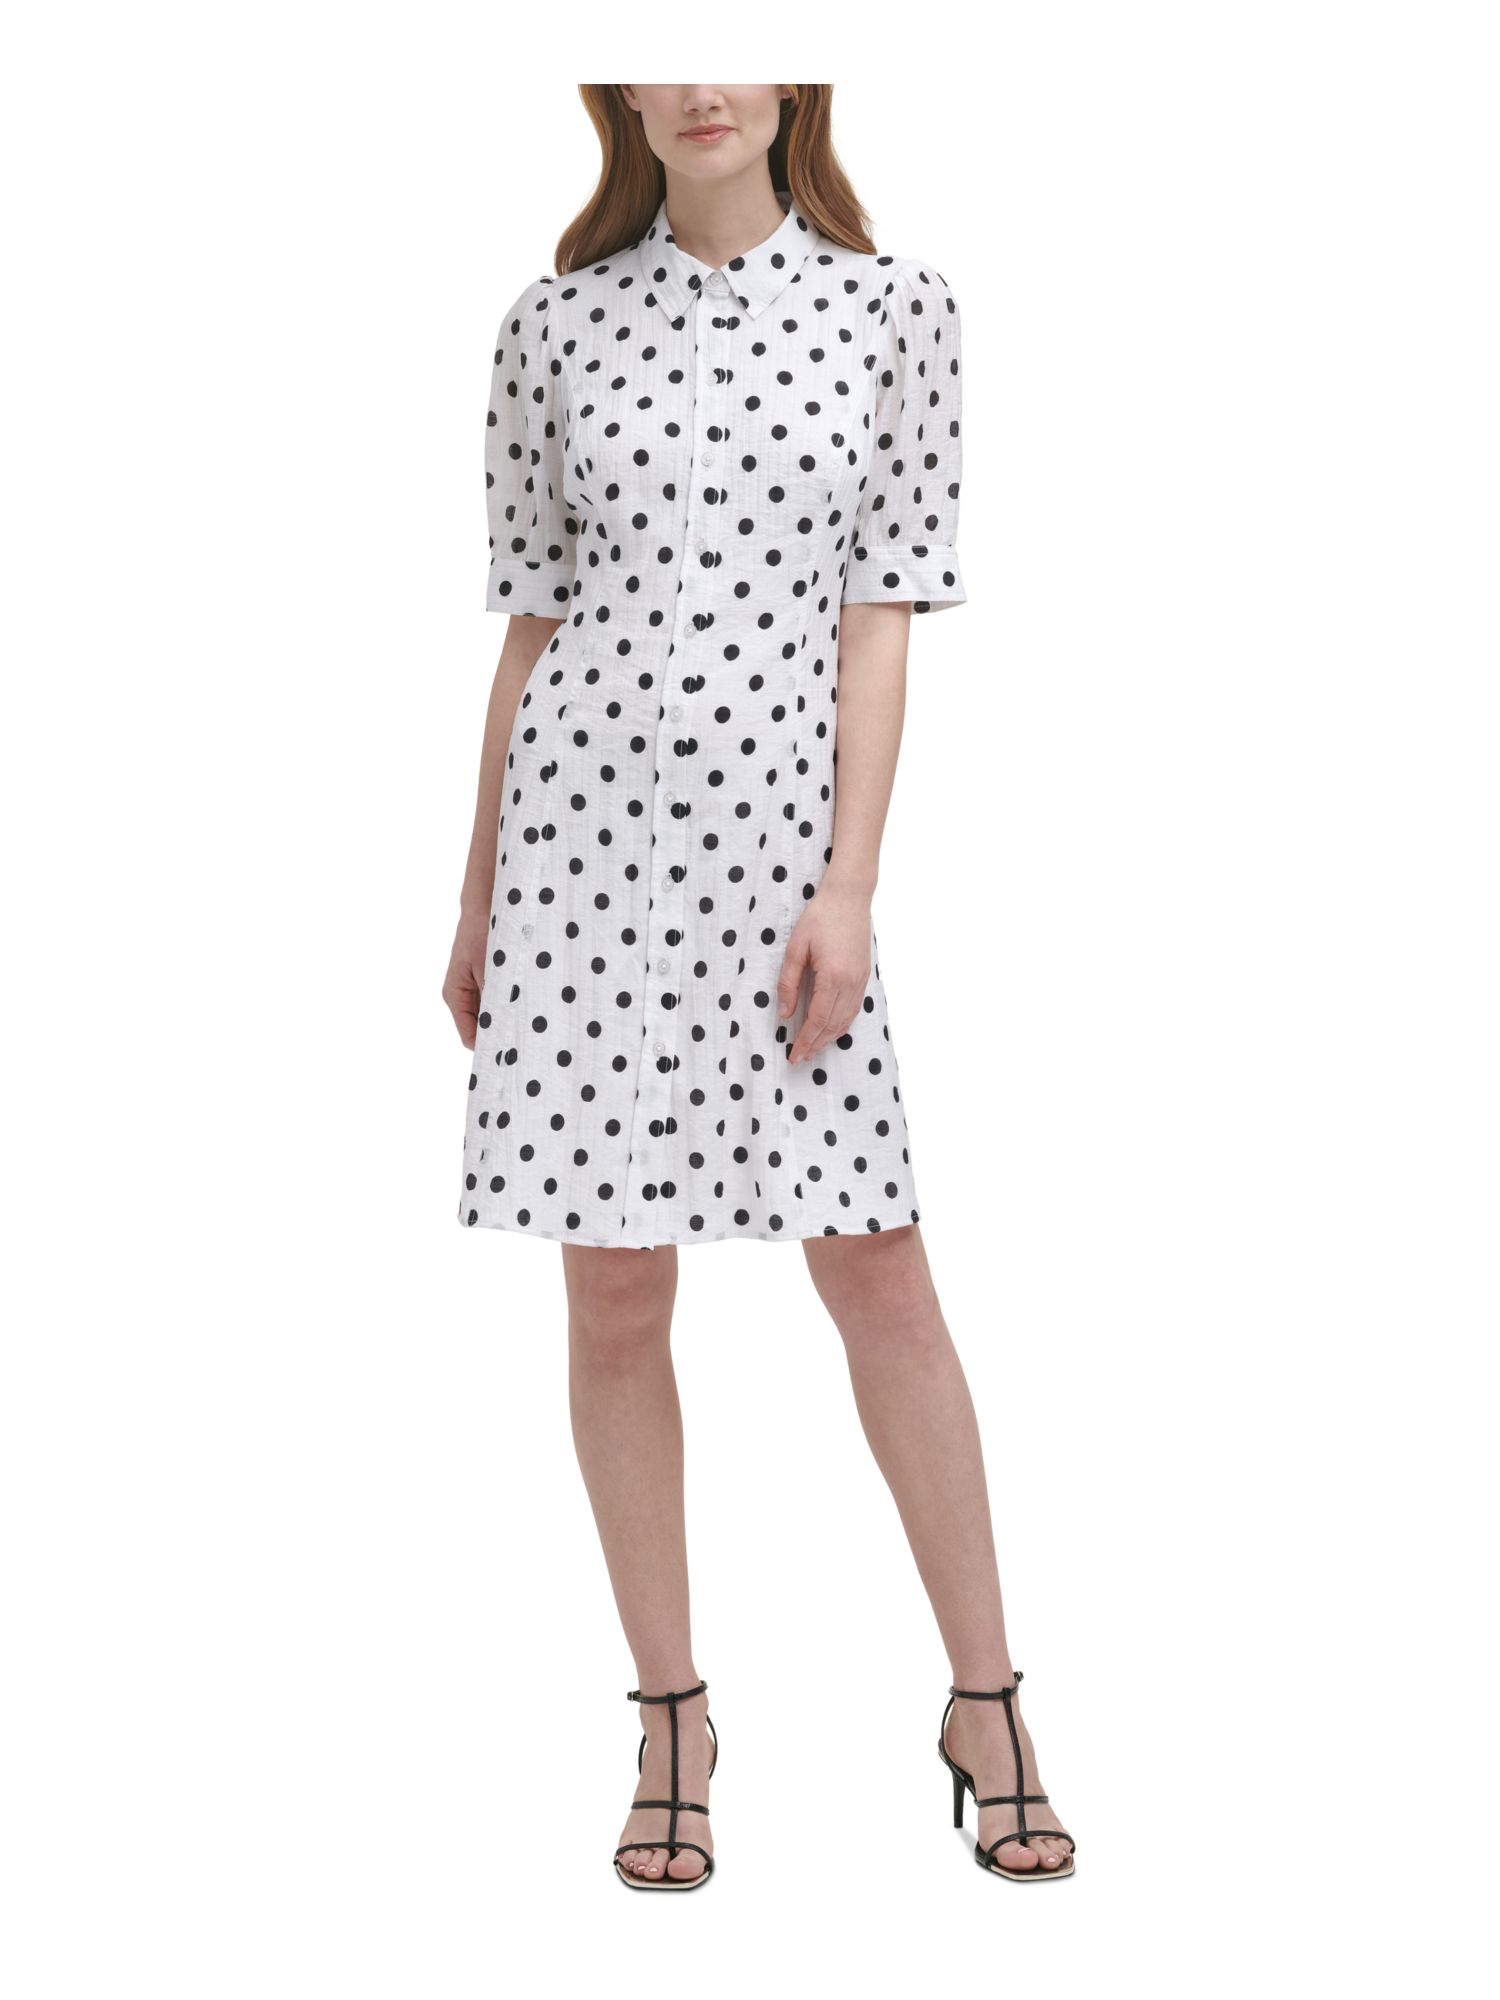 DKNY Womens Ivory Fitted Button Front Lined Polka Dot Elbow Sleeve Collared Above The Knee Wear To Work Shirt Dress 14